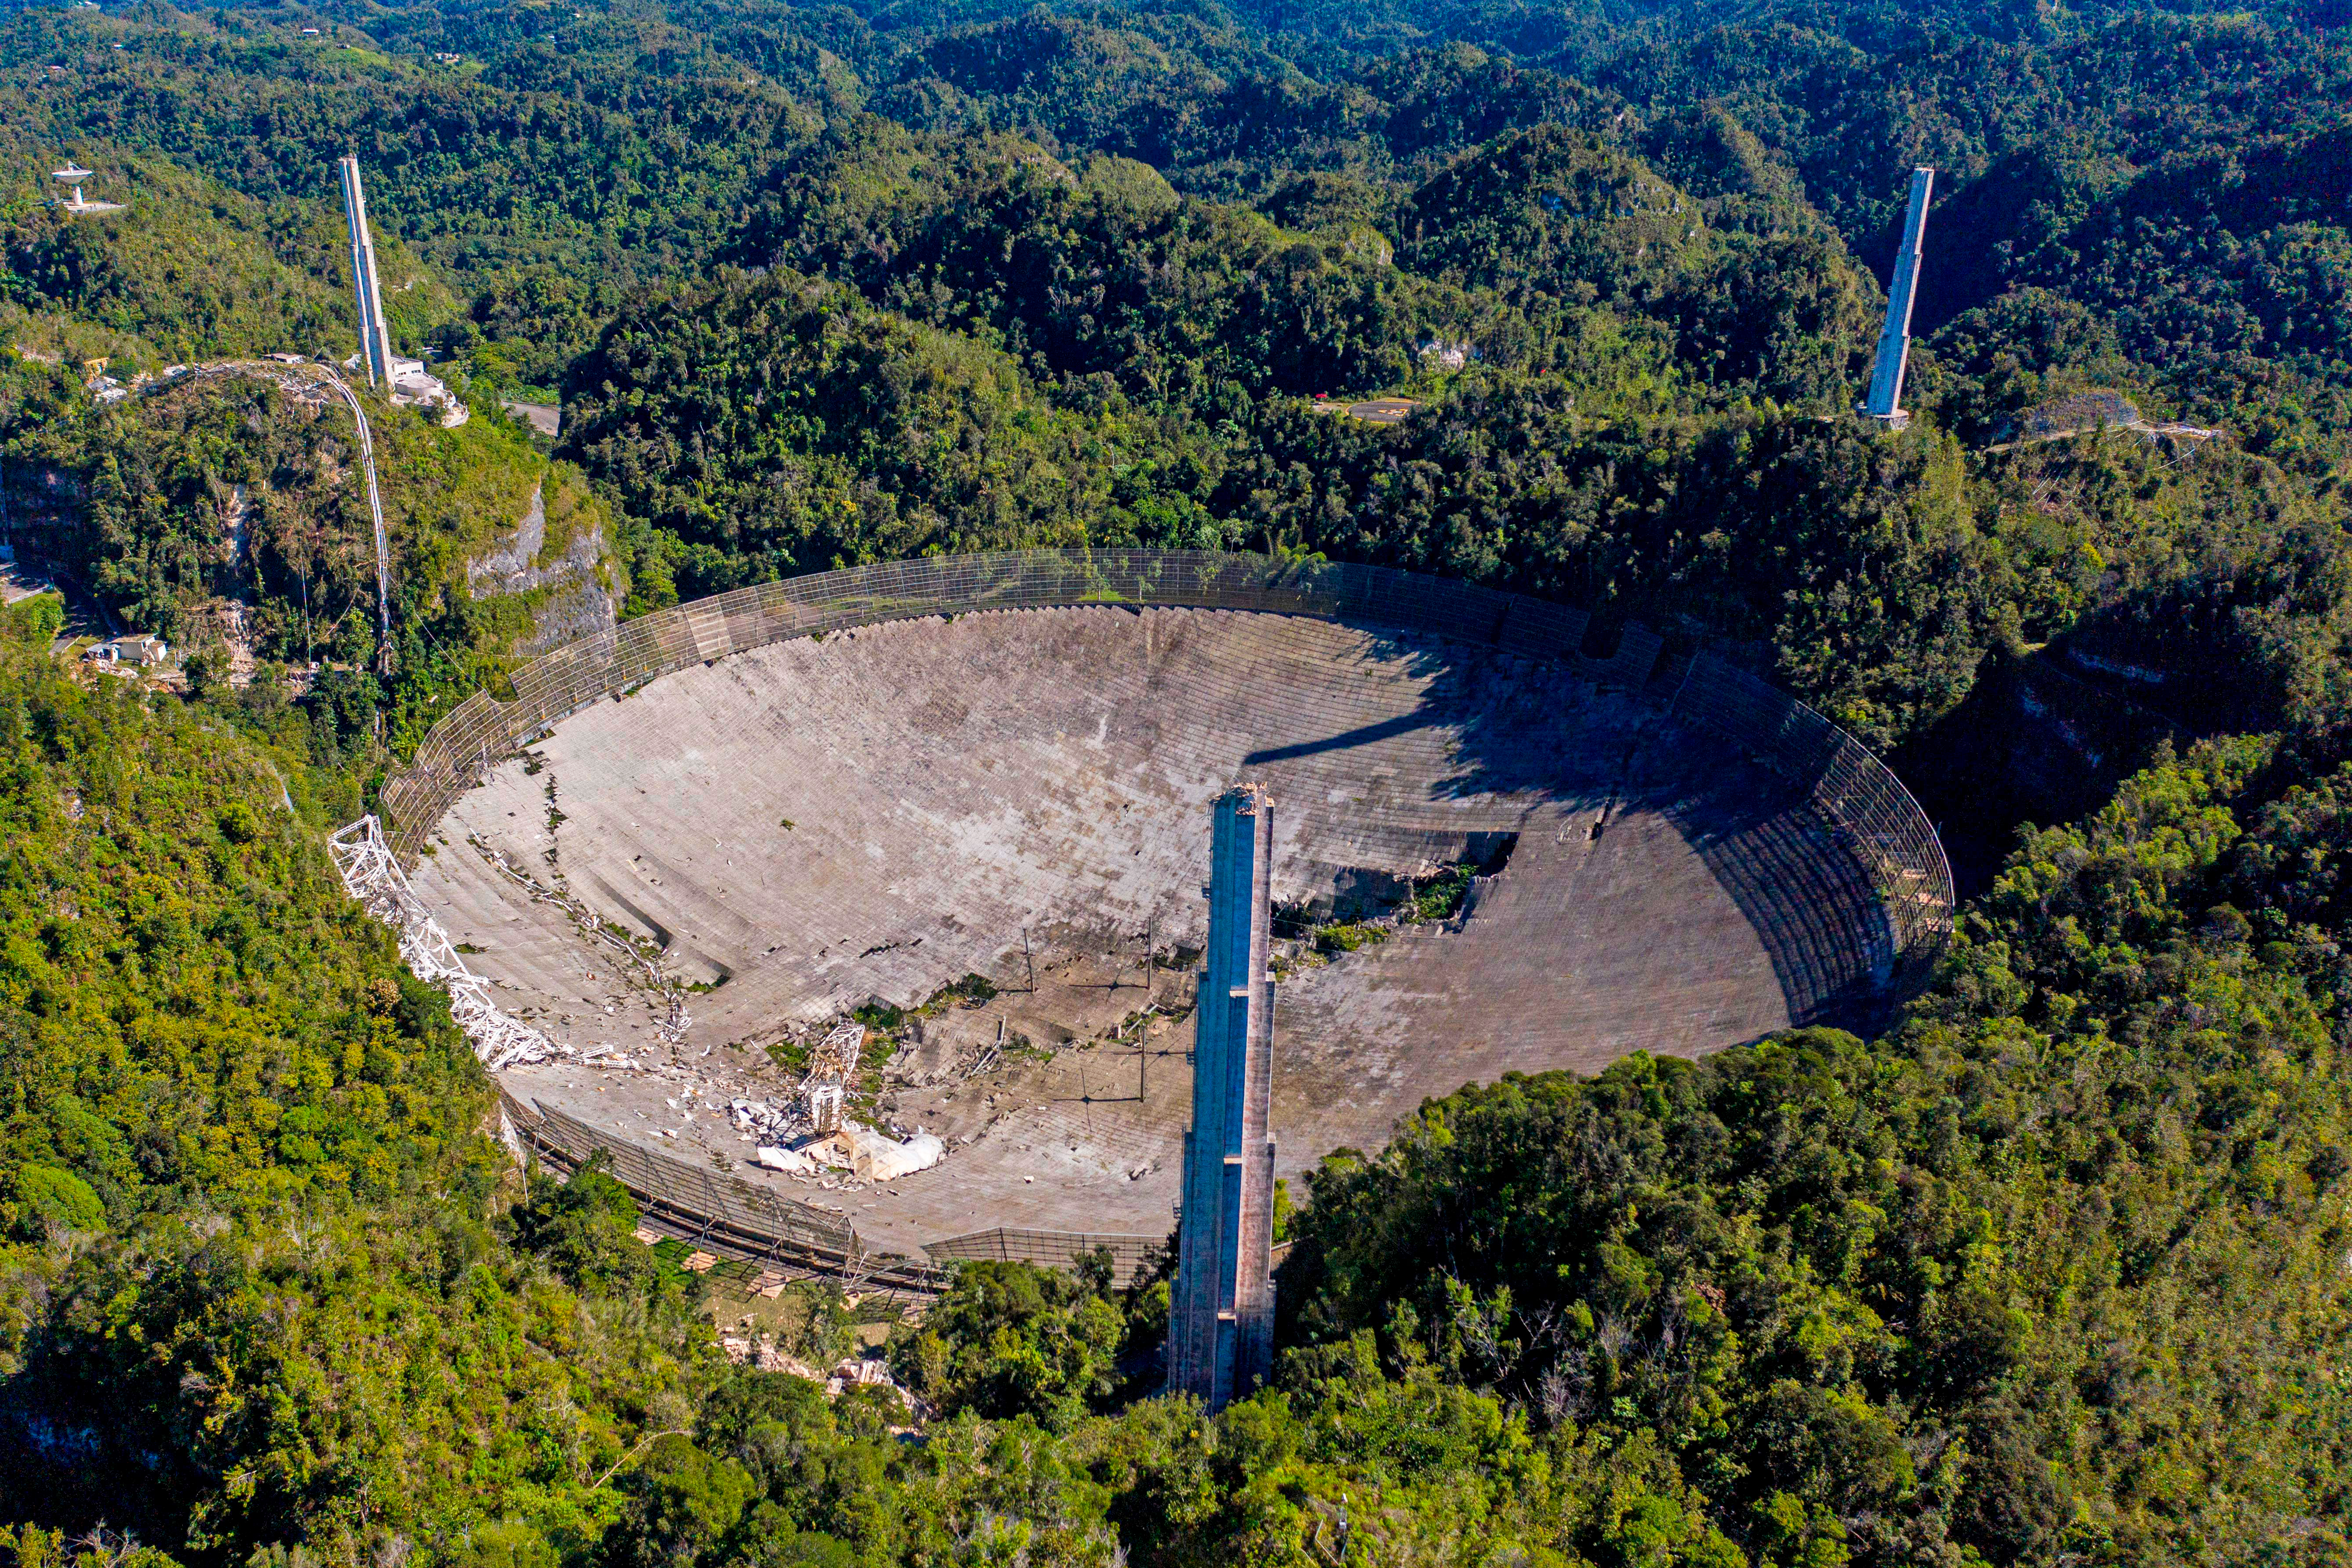 The Arecibo Observatory's next phase as a STEM education center starts in 2024